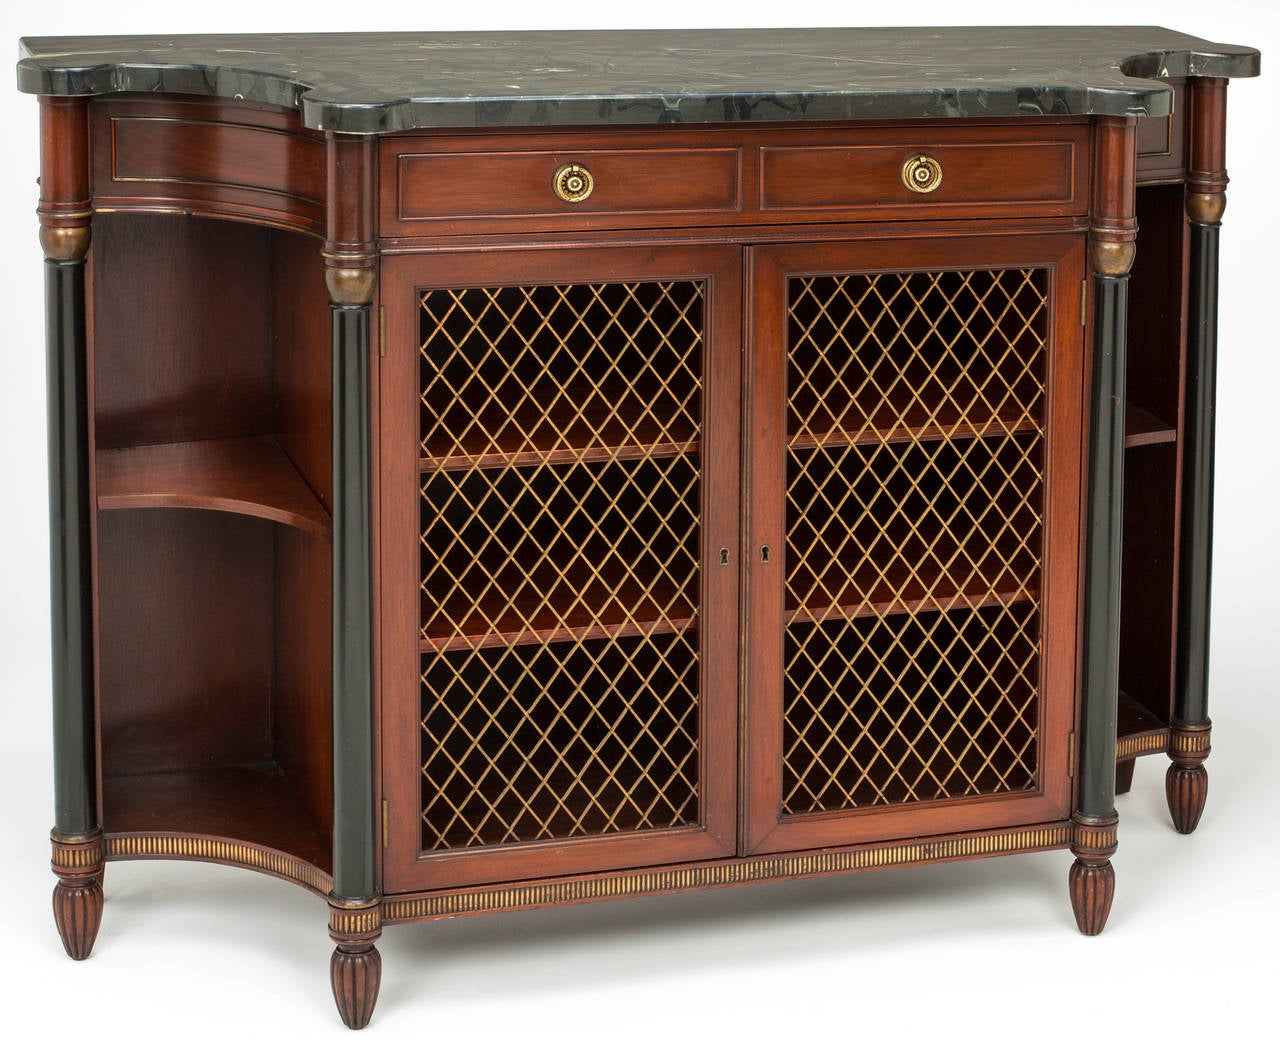 Pair of Mahogany wood cabinets with ebonized wood posts and gilt work.  Original  black marble top.  Bowed shaped front with pair of drawers and cabinet doors in bronze grill with interior shelvings.  Sold as a single piece  or as a pair.